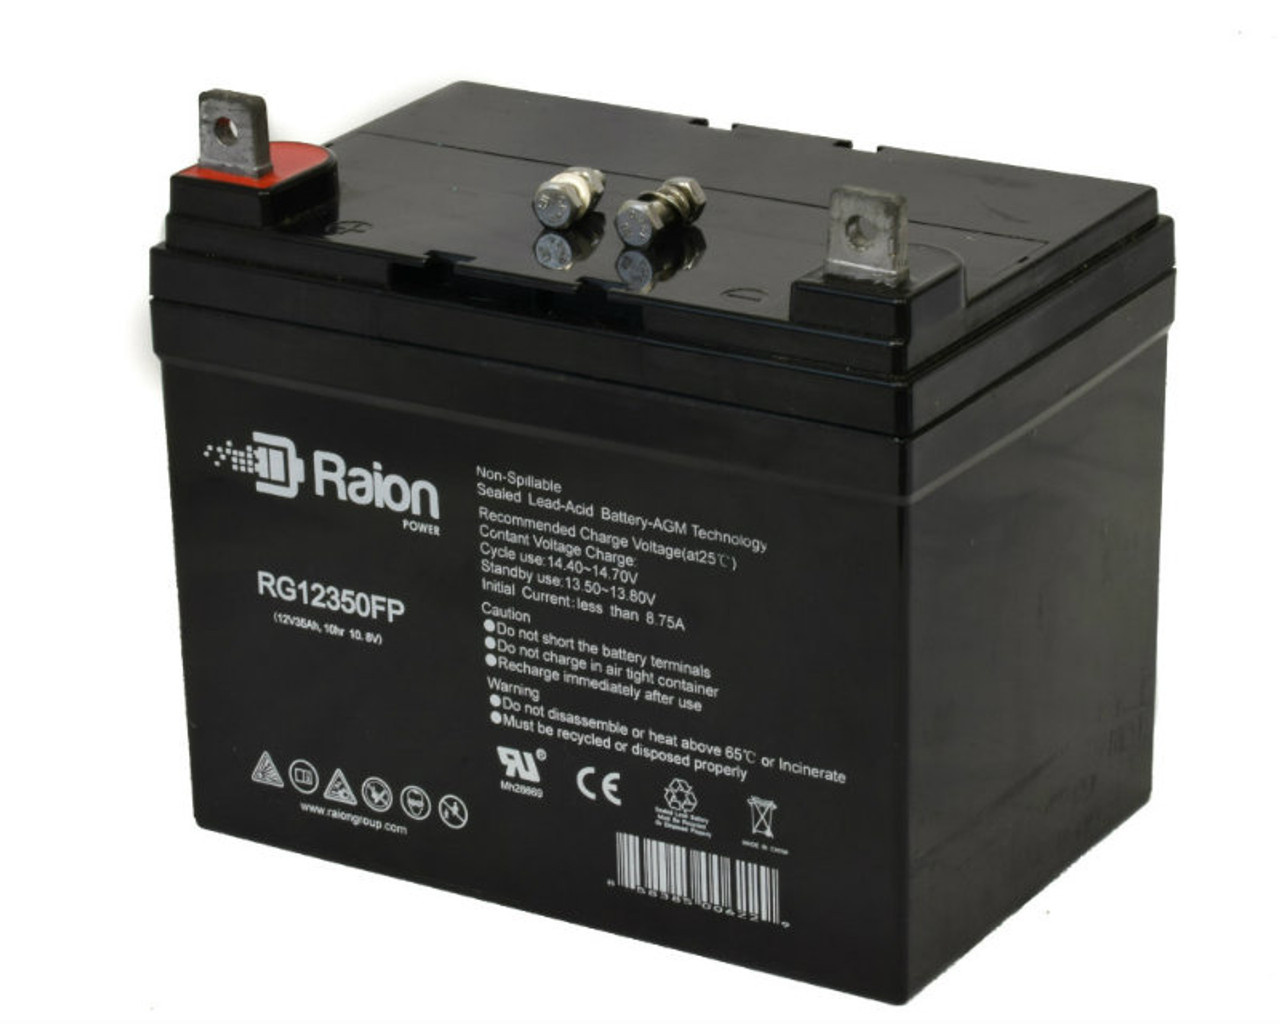 Raion Power Replacement 12V 35Ah RG12350FP Battery for Taico TP12-33